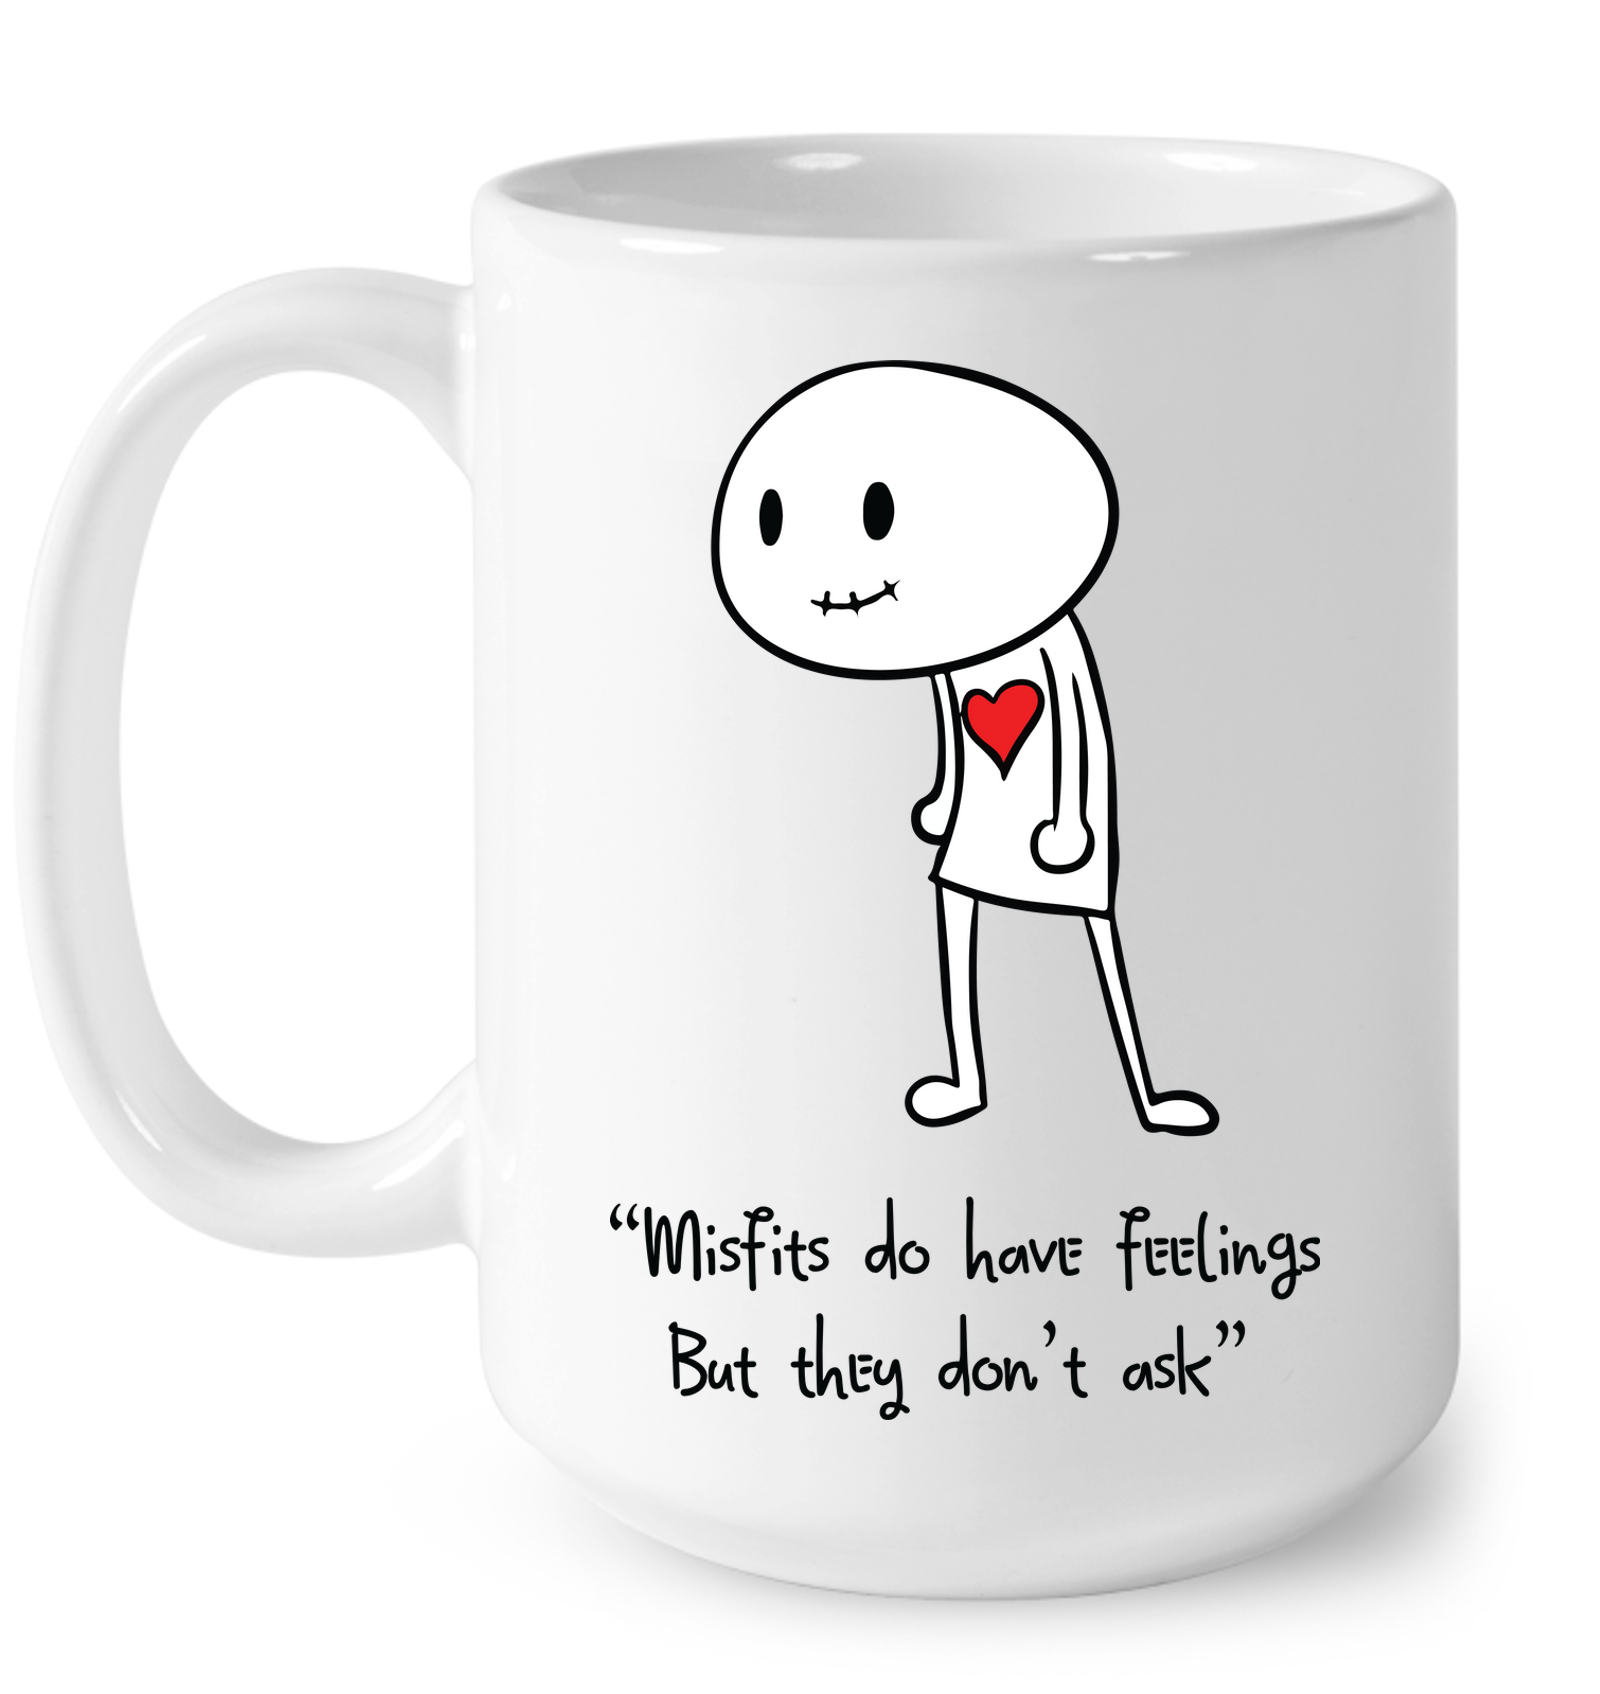 Misfits do have Feelings but they don't ask - Ceramic Mug